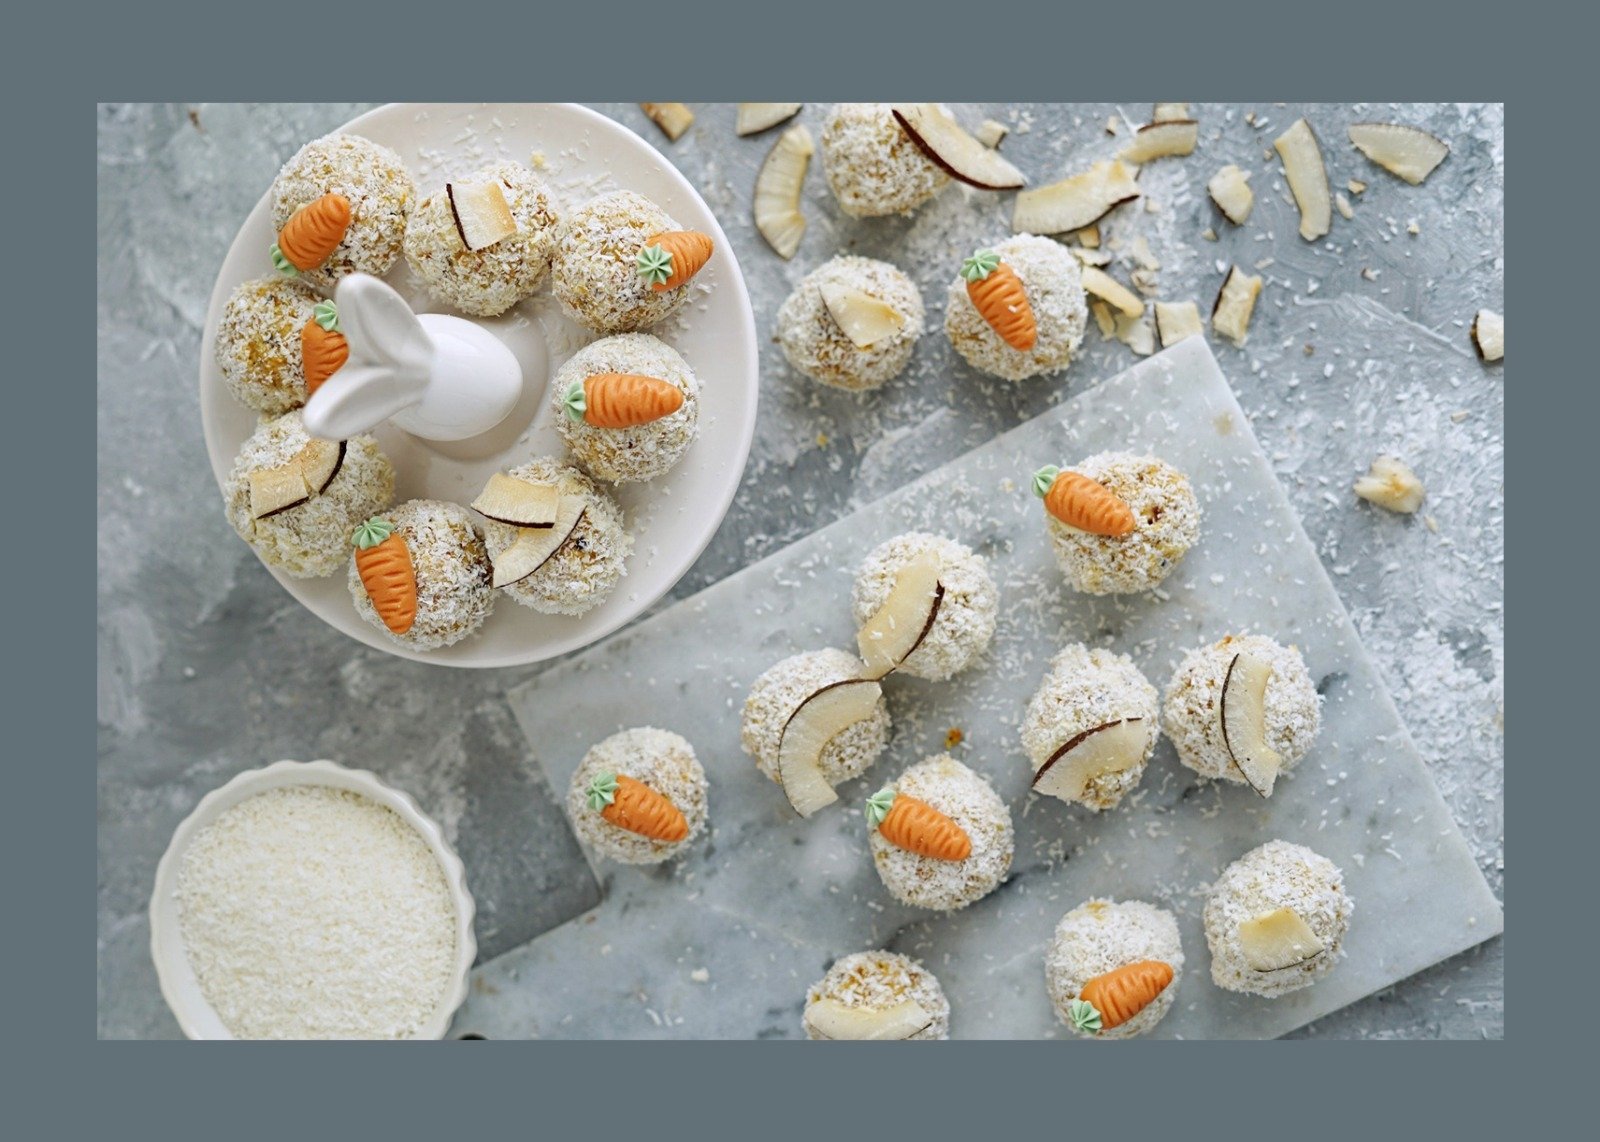 These baby carrot cakes will make a great addition to any Easter festivities you have planned. (dpa Photo)